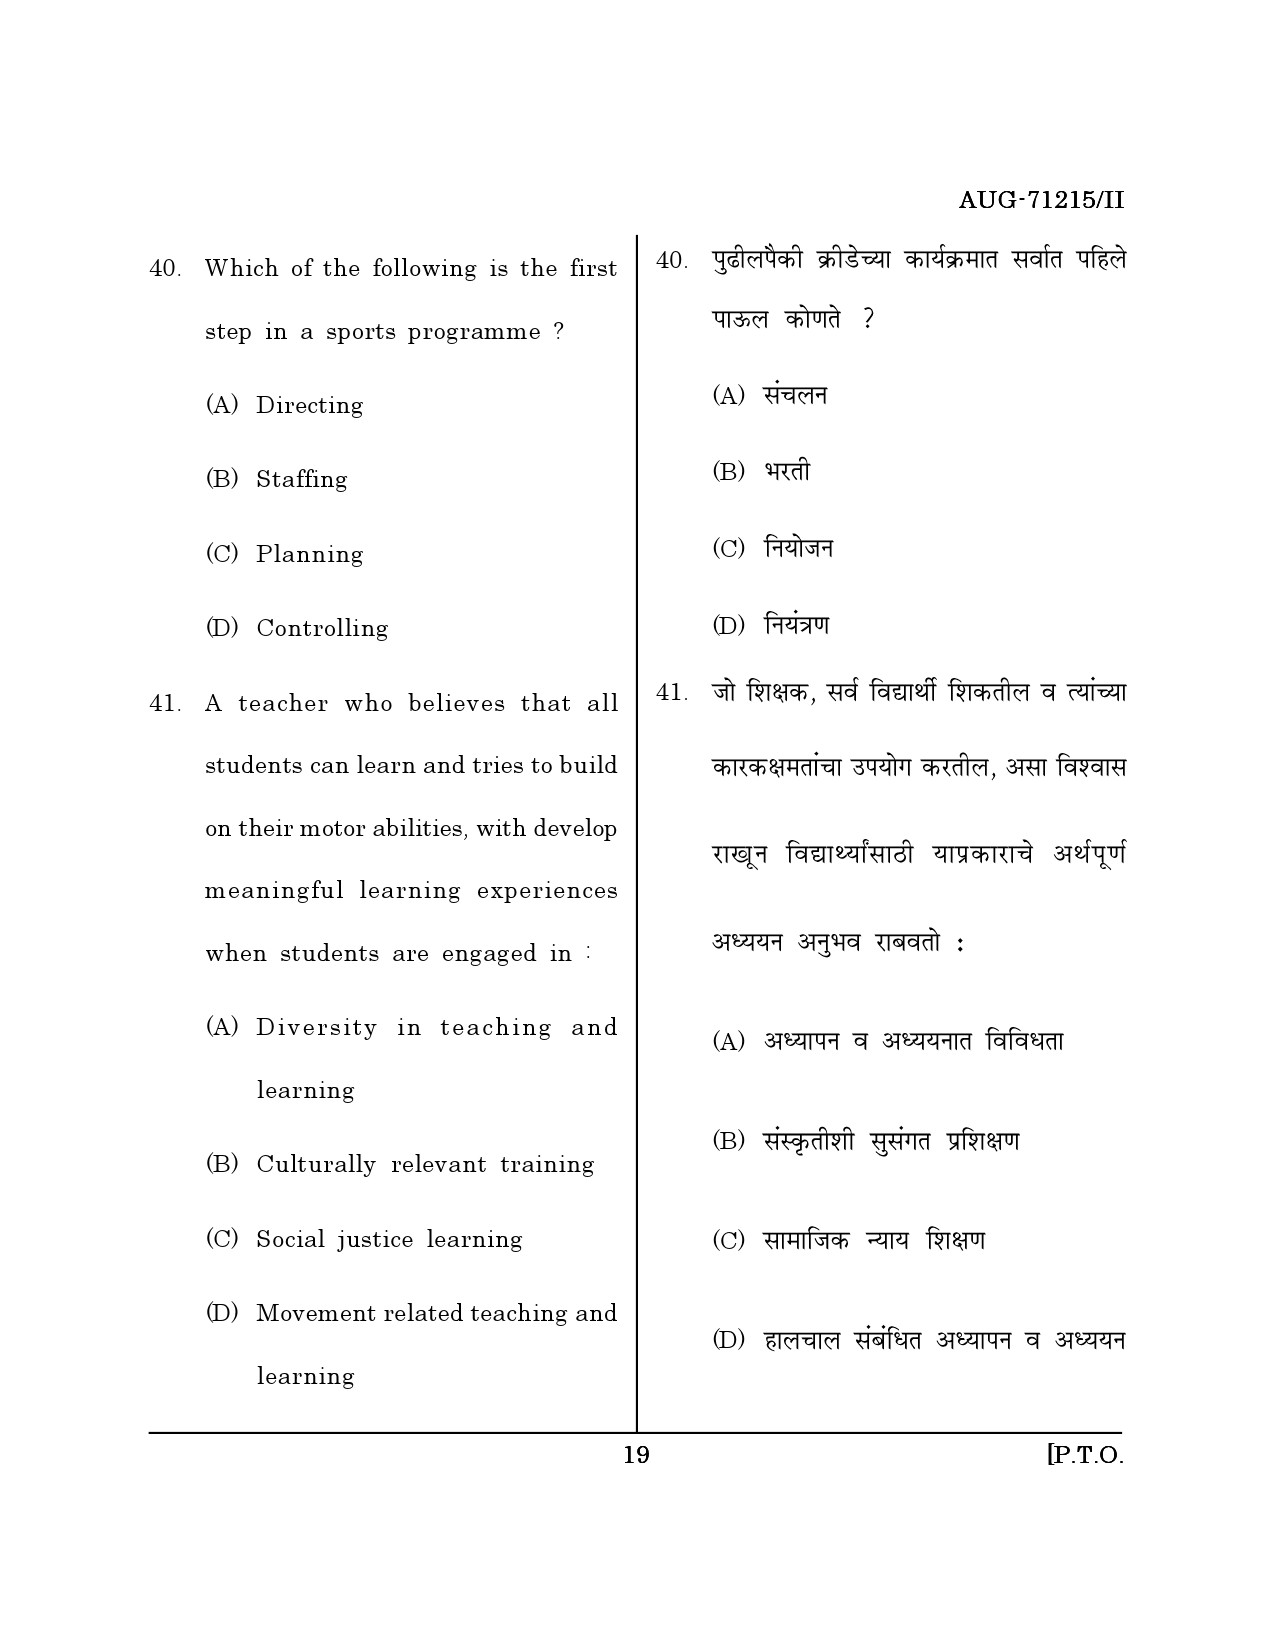 Maharashtra SET Physical Education Question Paper II August 2015 18